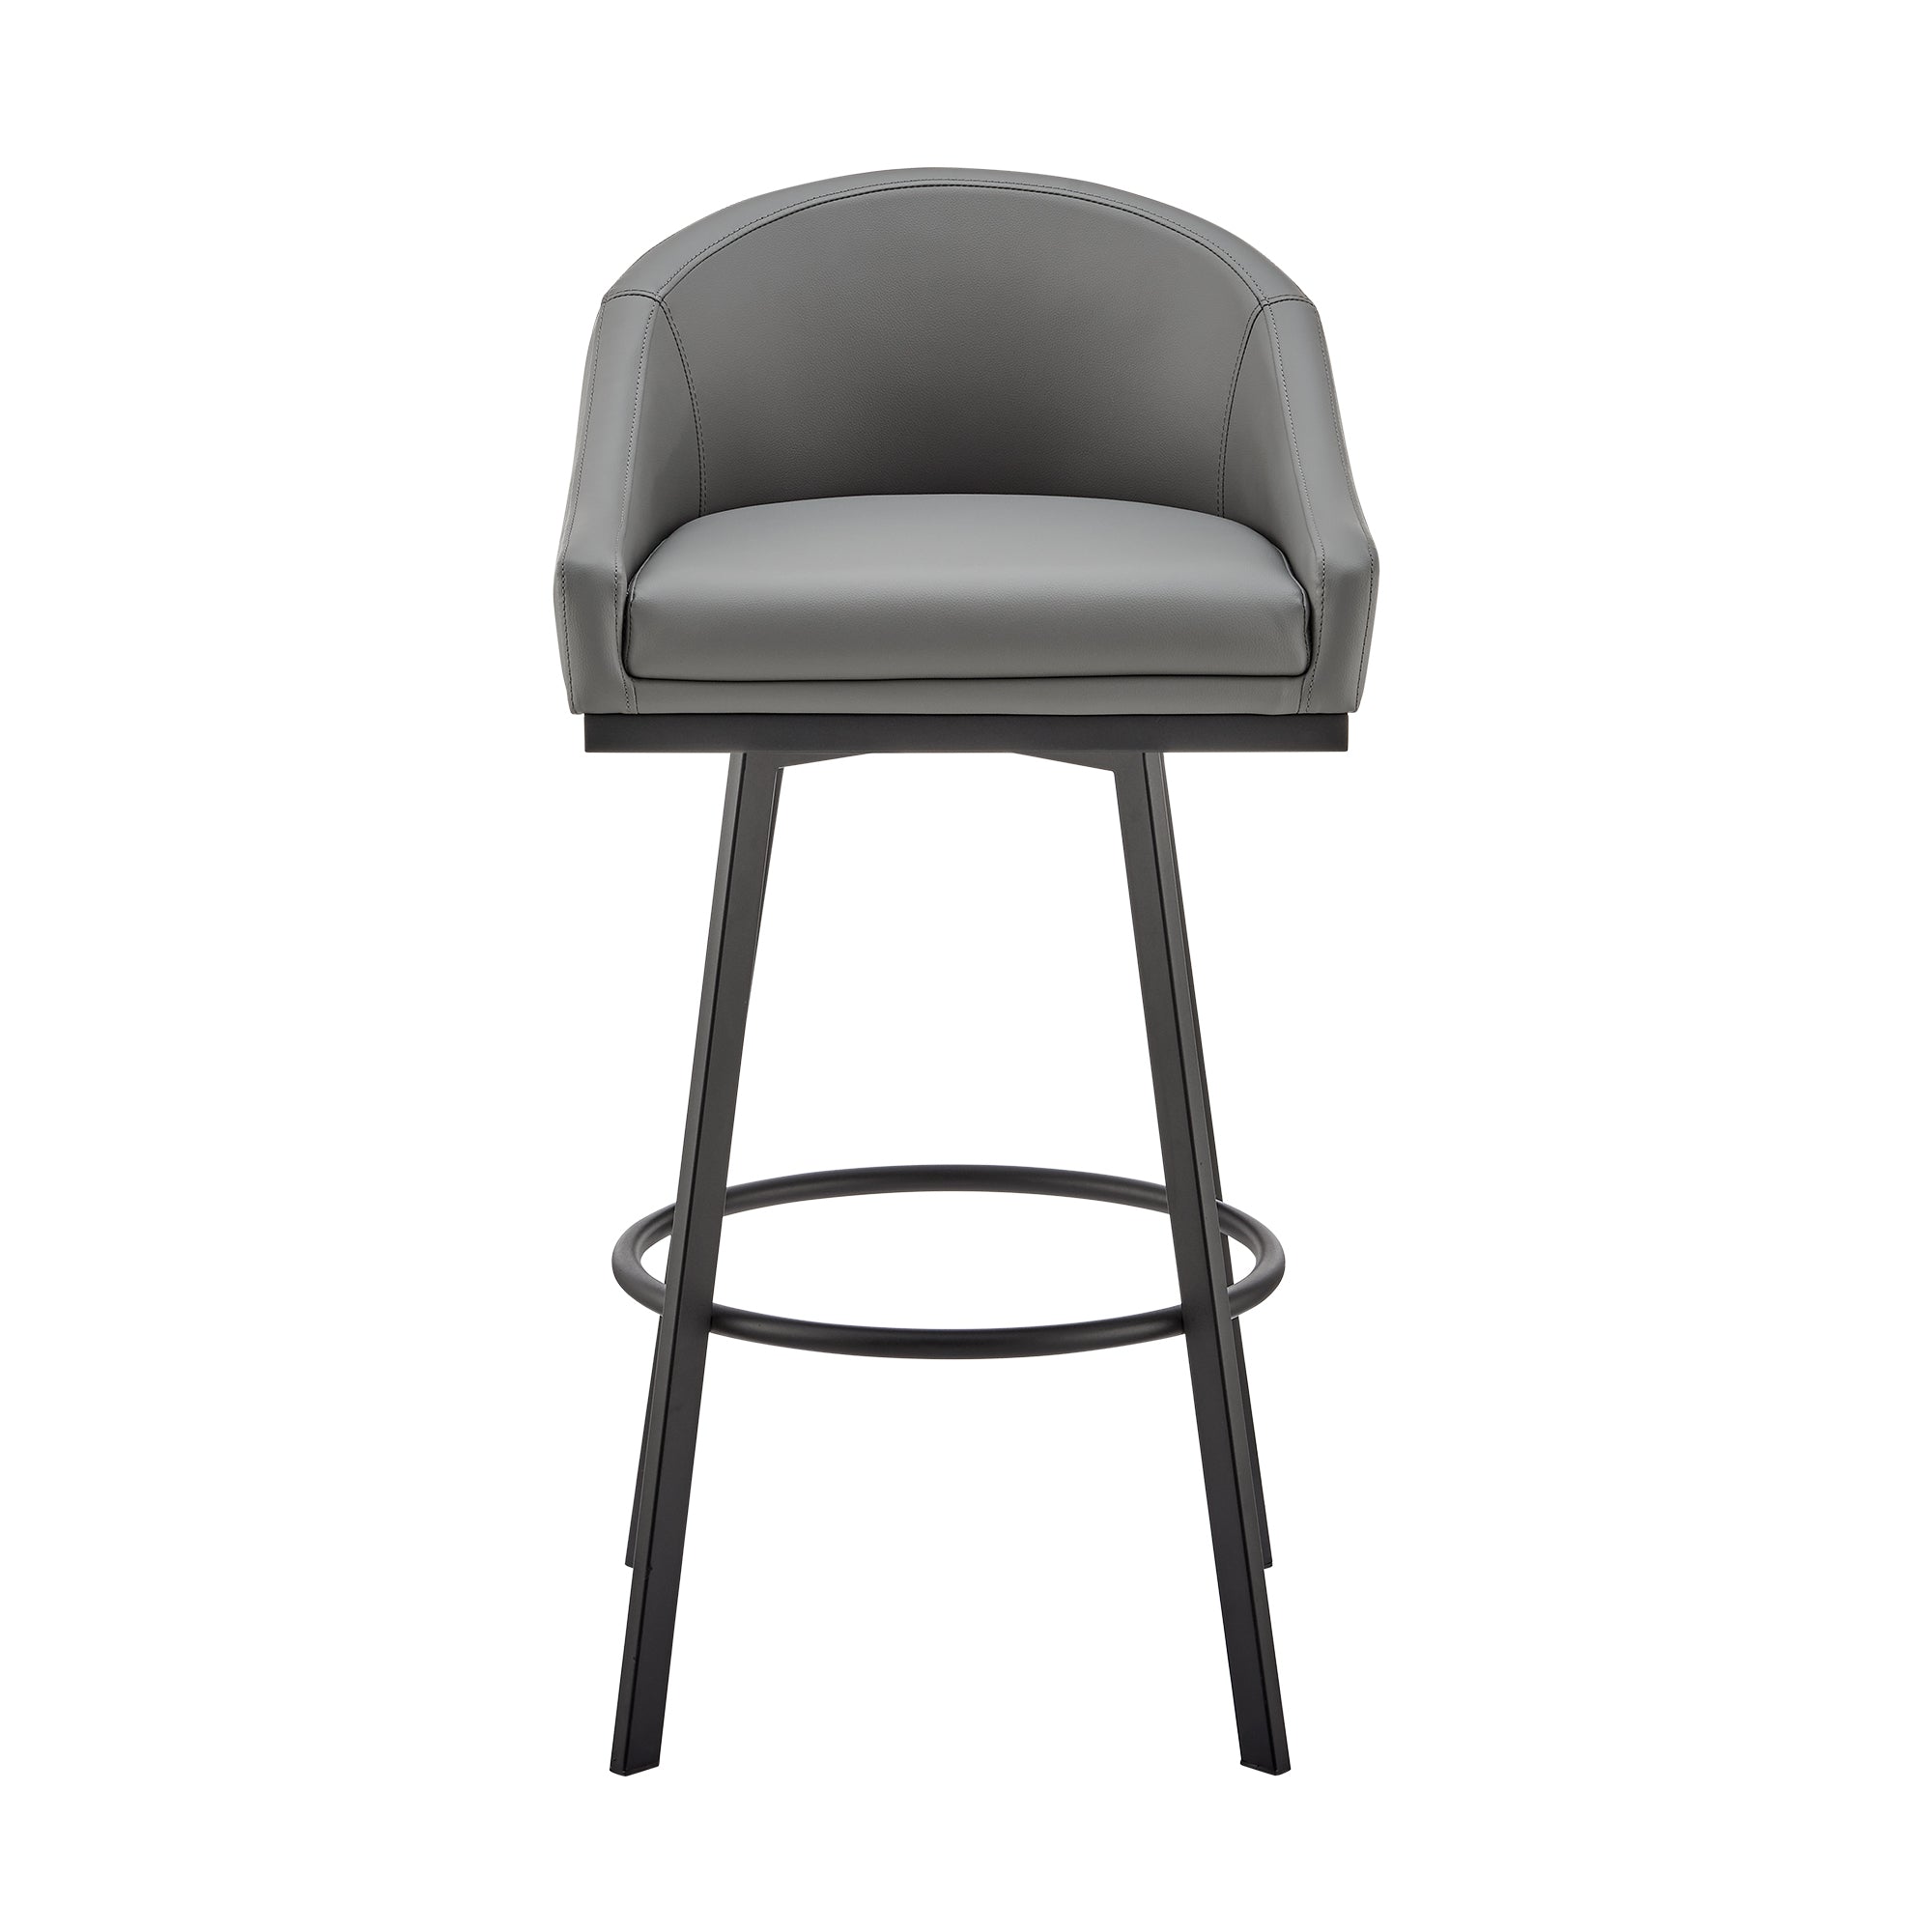 Armen Living - Noran Swivel Bar or Counter Stool in Faux Leather and Metal - 840254335783